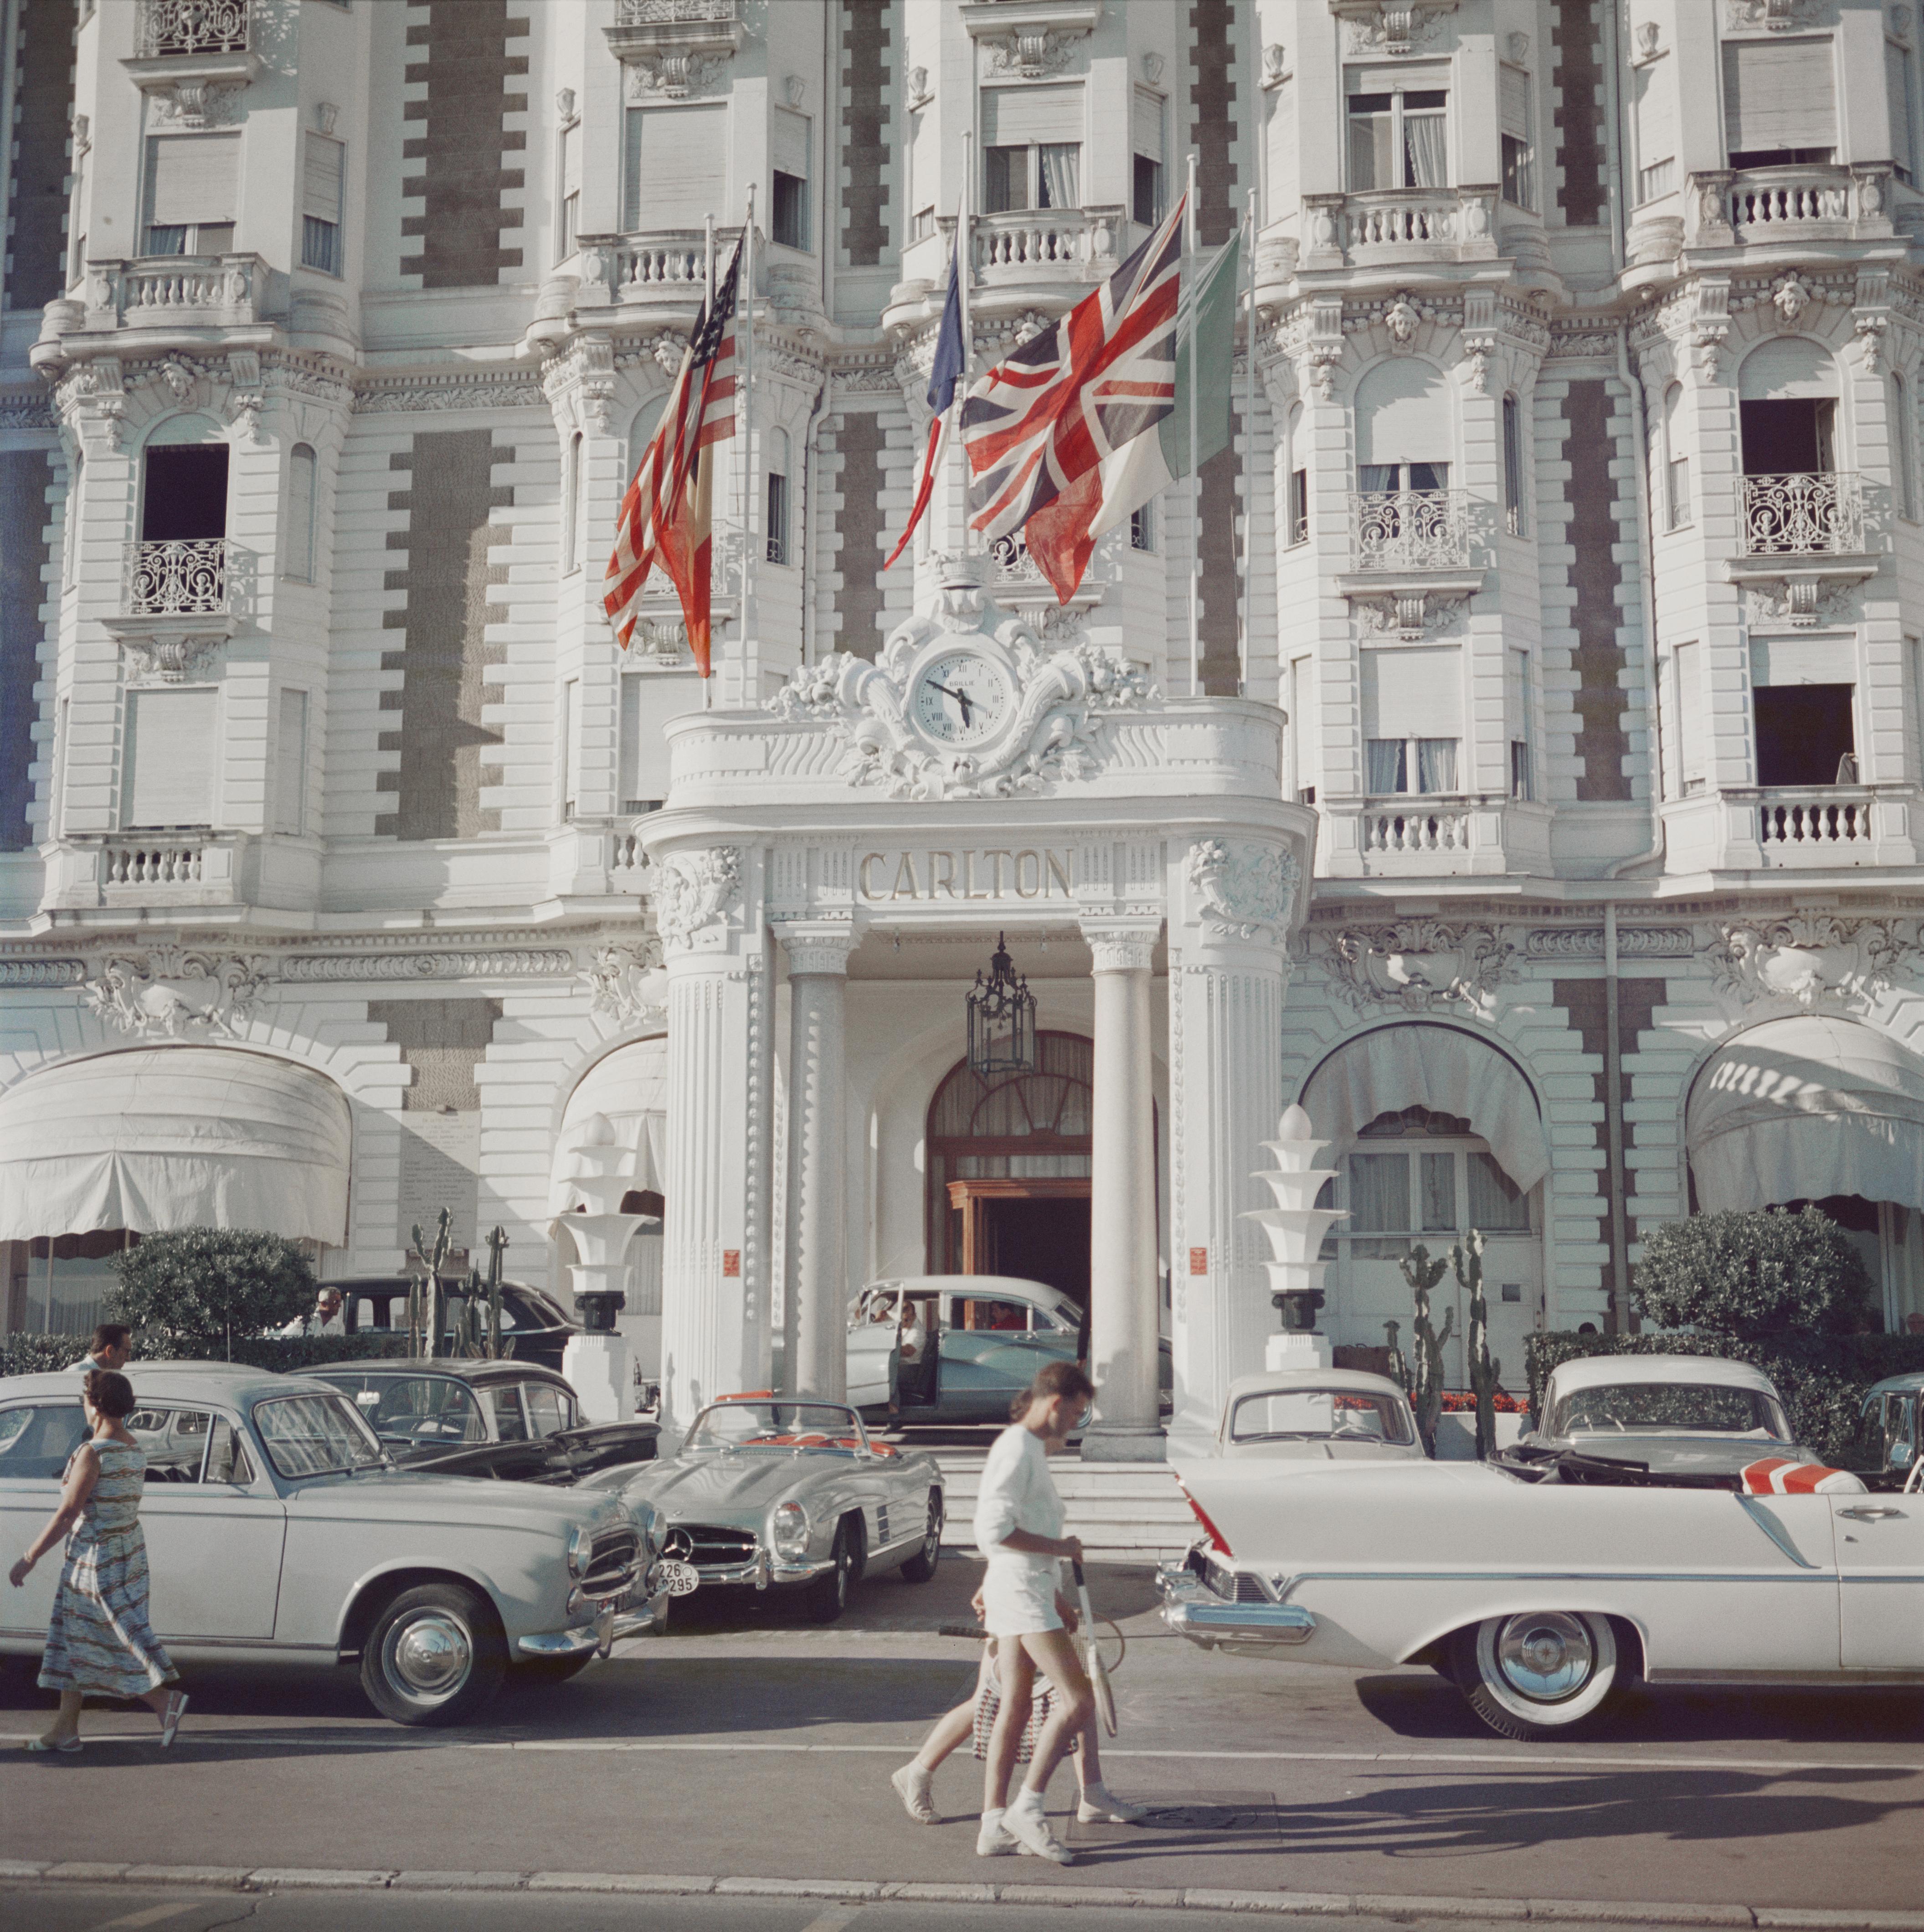 'Carlton Hotel' 1958 Slim Aarons Limited Estate Edition

The entrance to the Carlton Hotel, Cannes, France, 1958. (Photo by Slim Aarons)

C Print
Produced from the original transparency
Certificate of authenticity supplied 
THIS PRINT 30x30 inches /